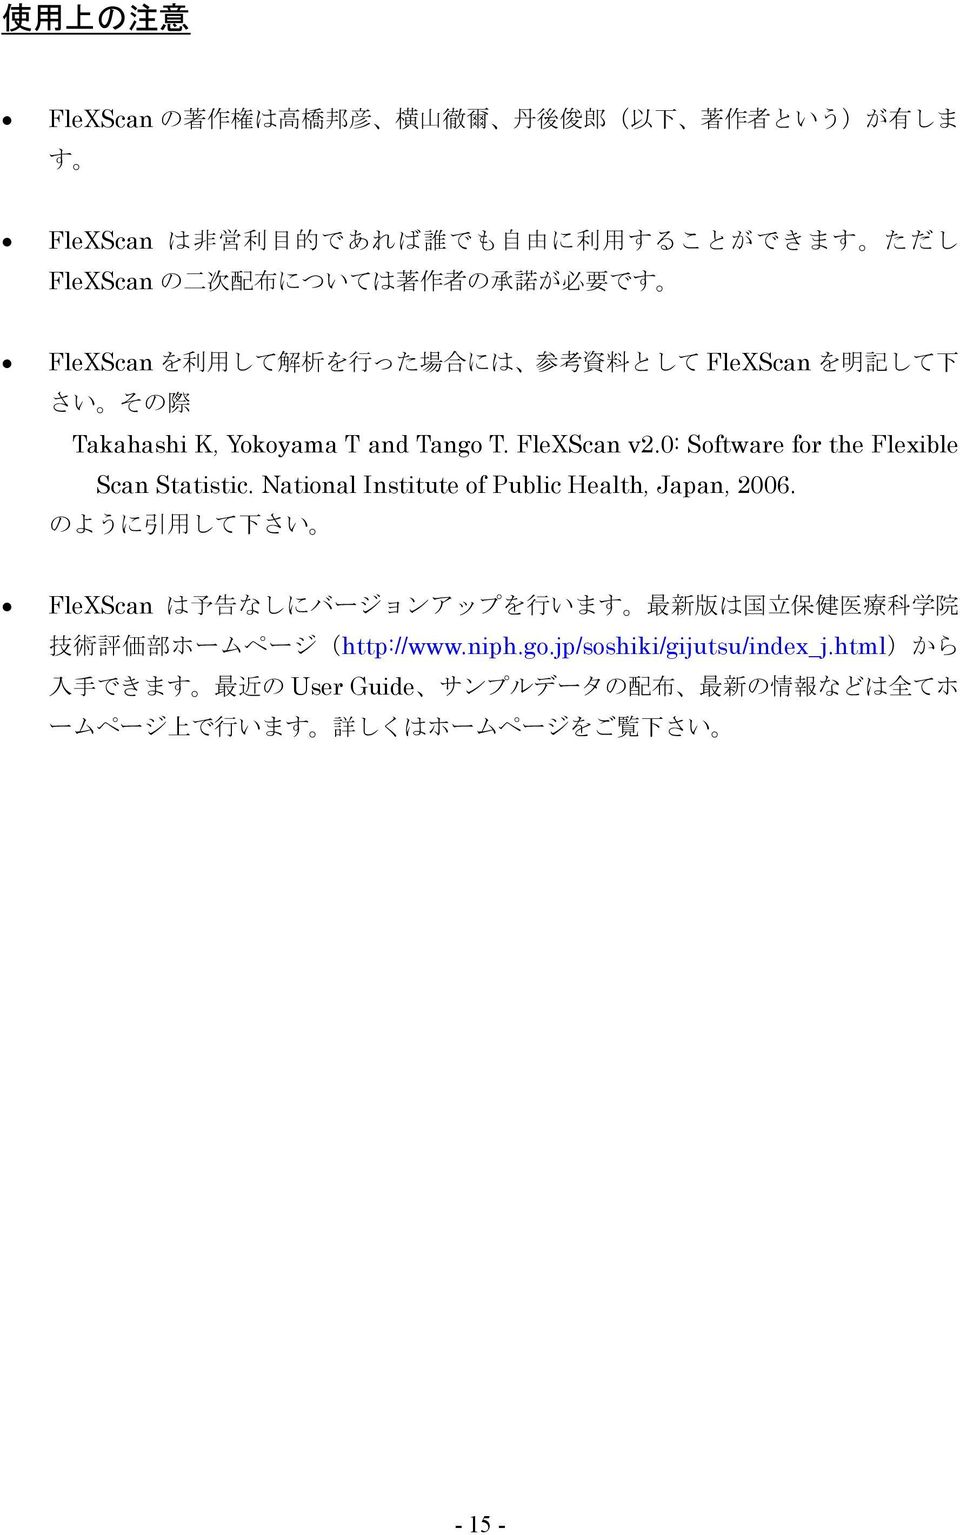 0: Software for the Flexible Scan Statistic. National Institute of Public Health, Japan, 2006.